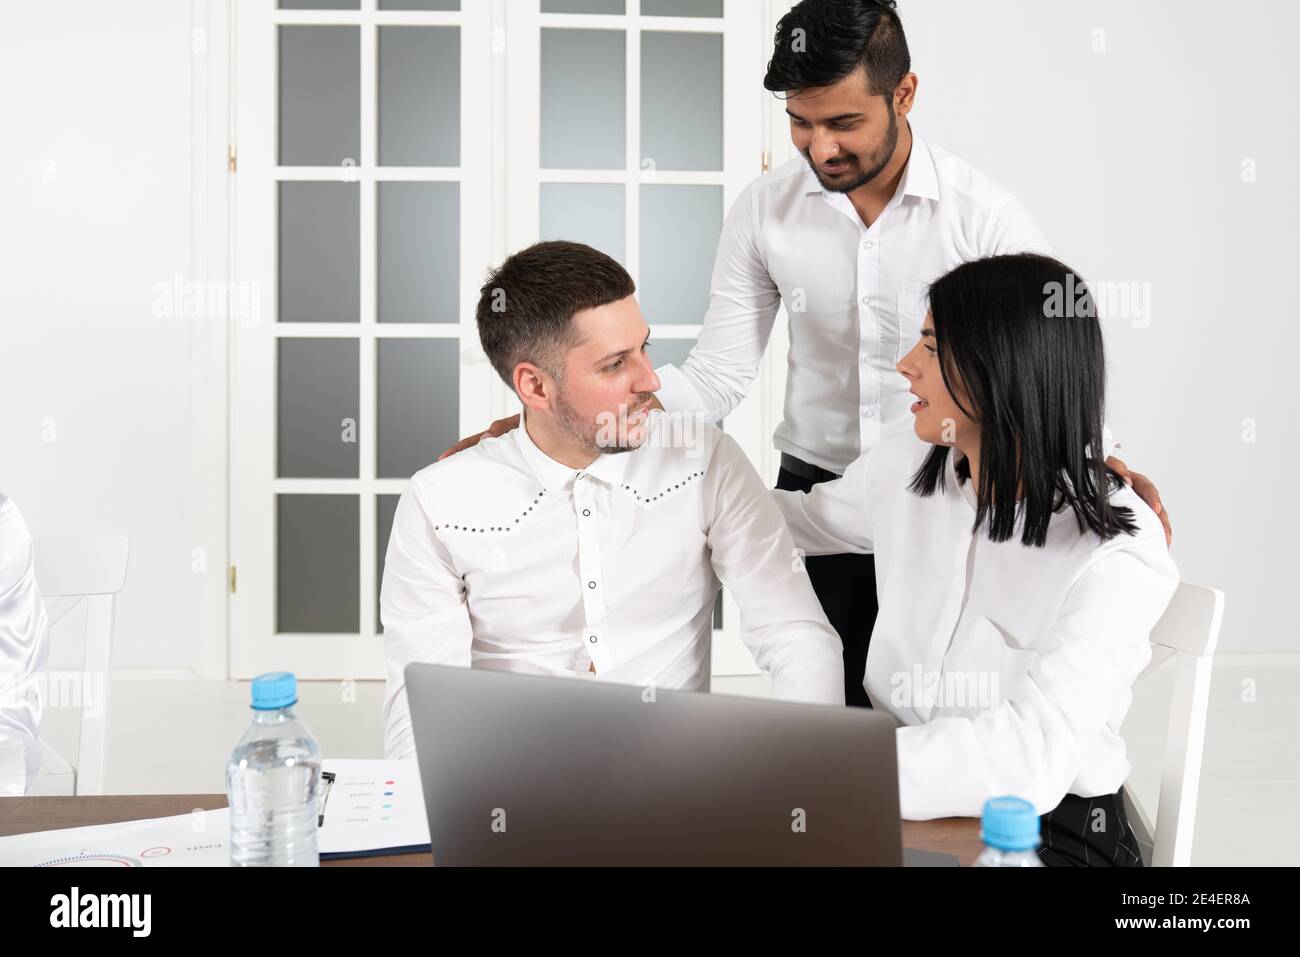 Group of international business people and software developers working as a team in modern office Stock Photo